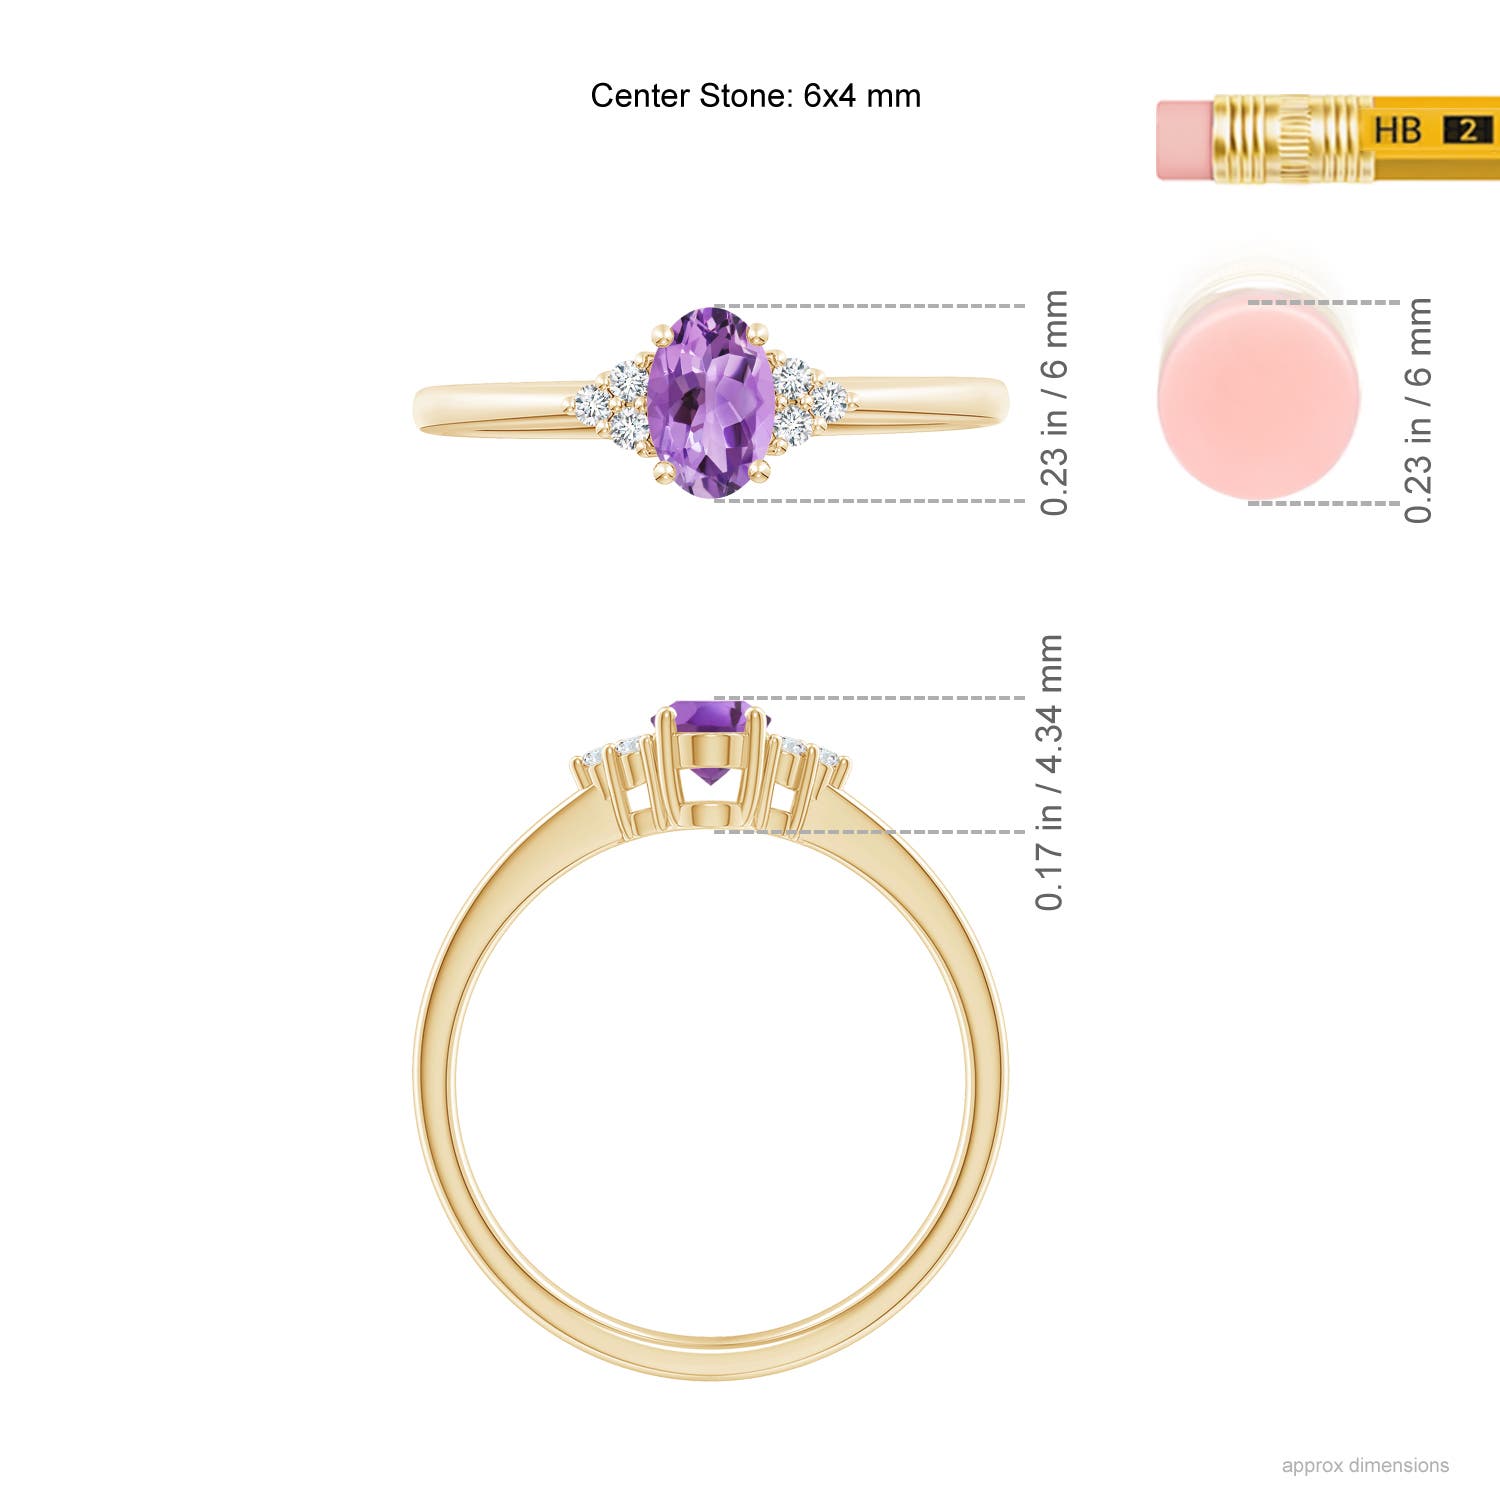 A - Amethyst / 0.46 CT / 14 KT Yellow Gold